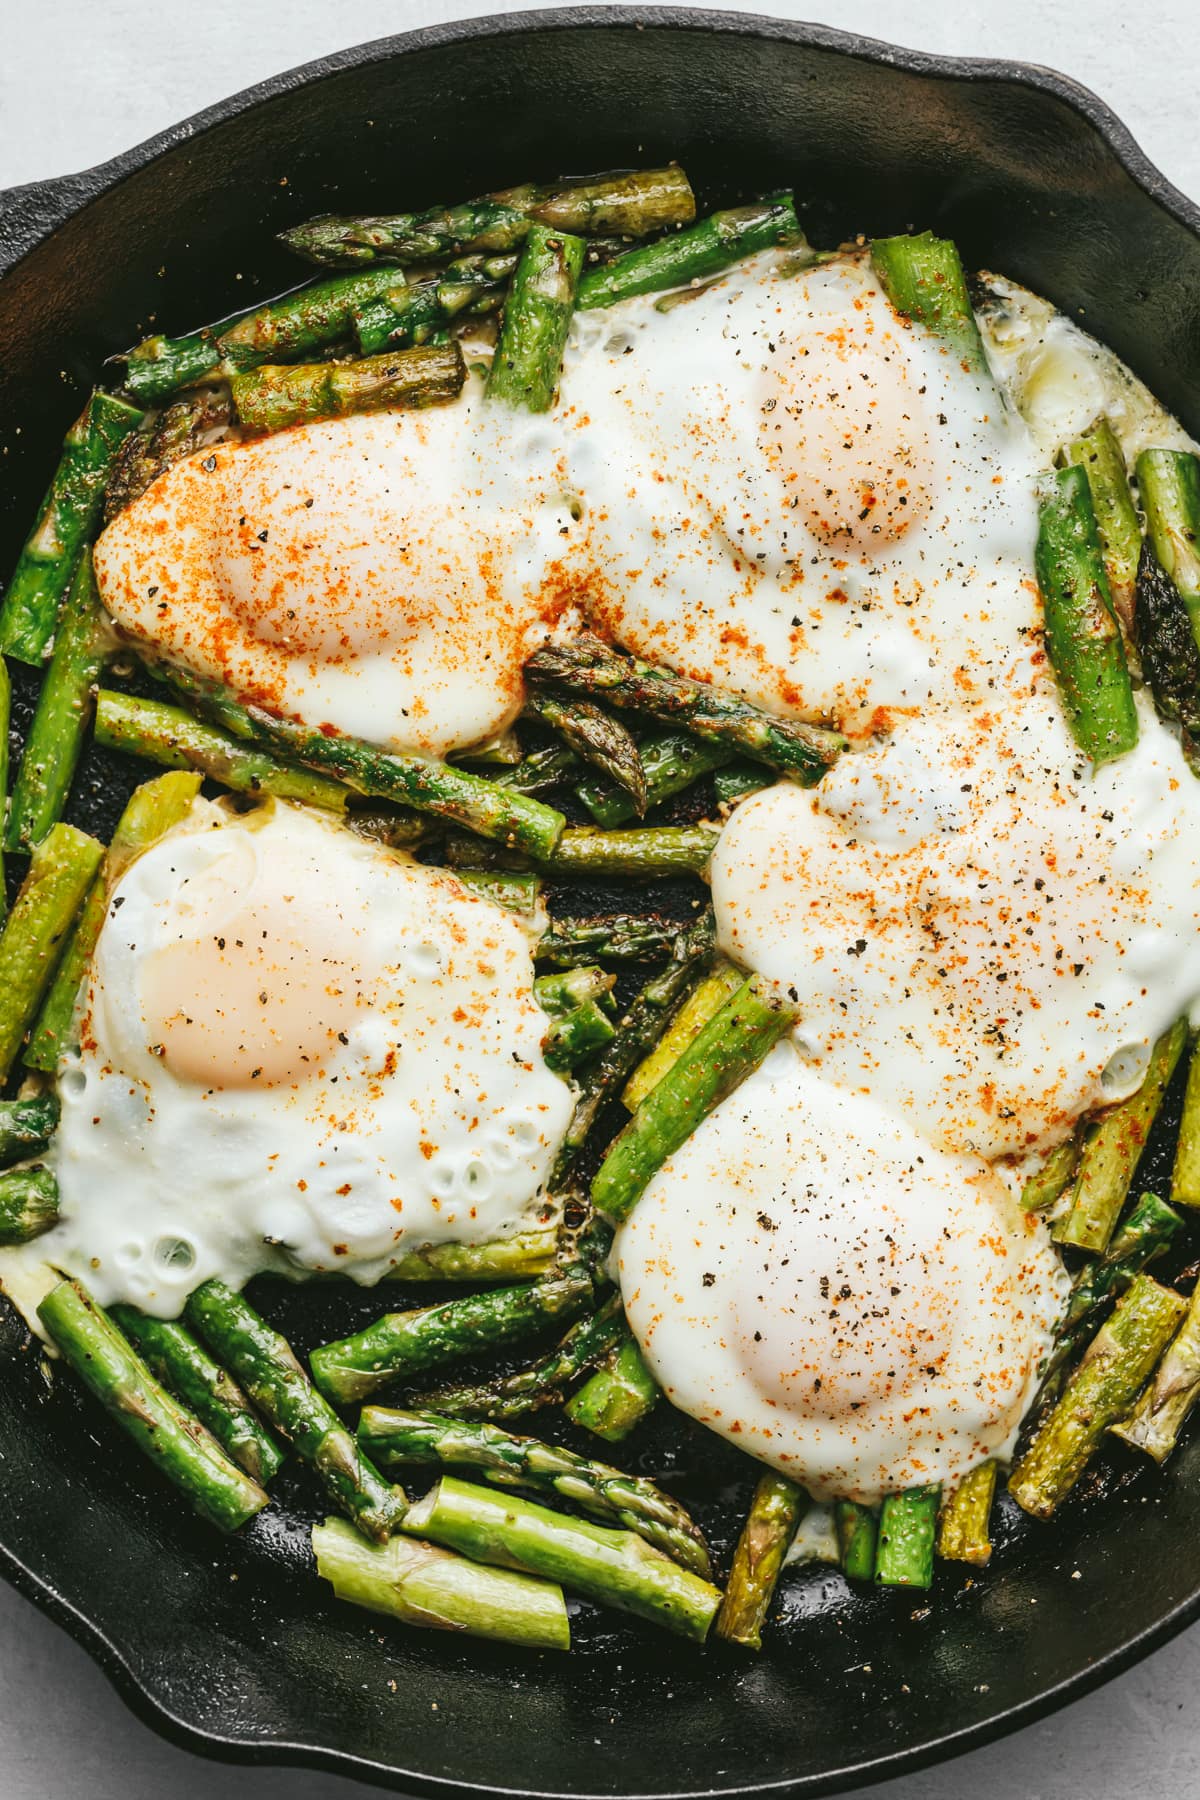 Asparagus and eggs in a black cast iron skillet.